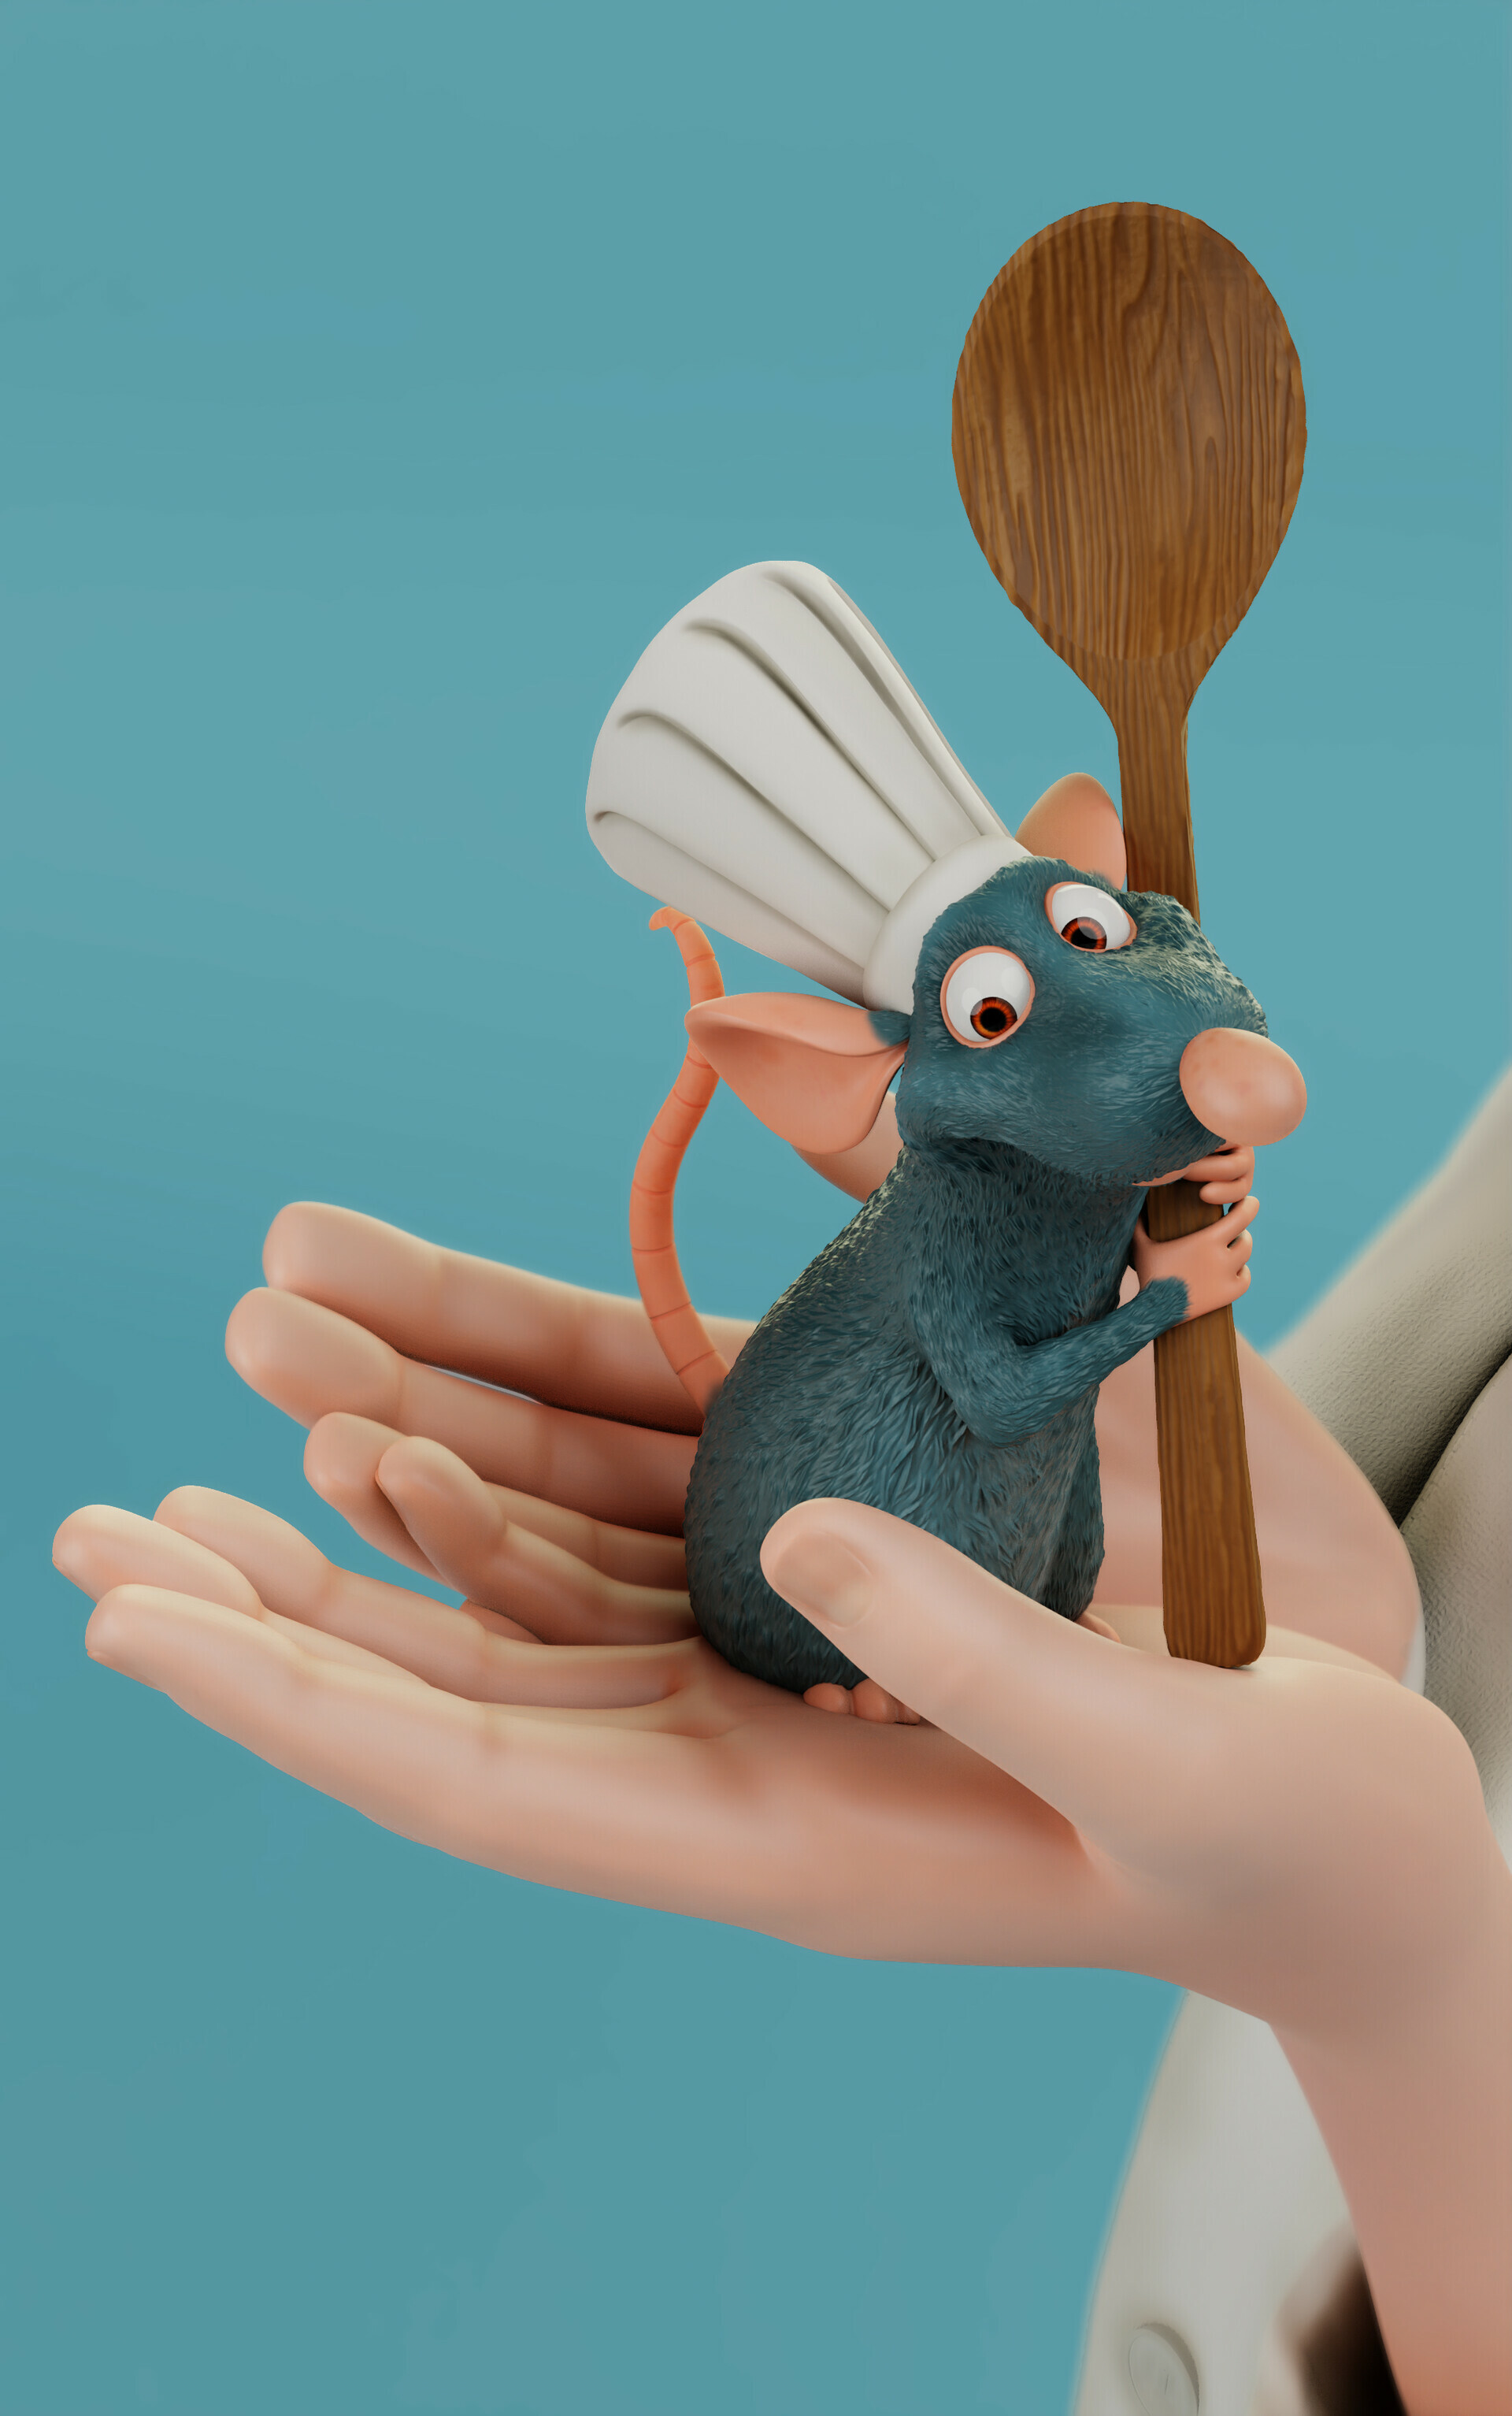 Ratatouille: Linguini and Remy, Fictional characters. 1920x3070 HD Wallpaper.